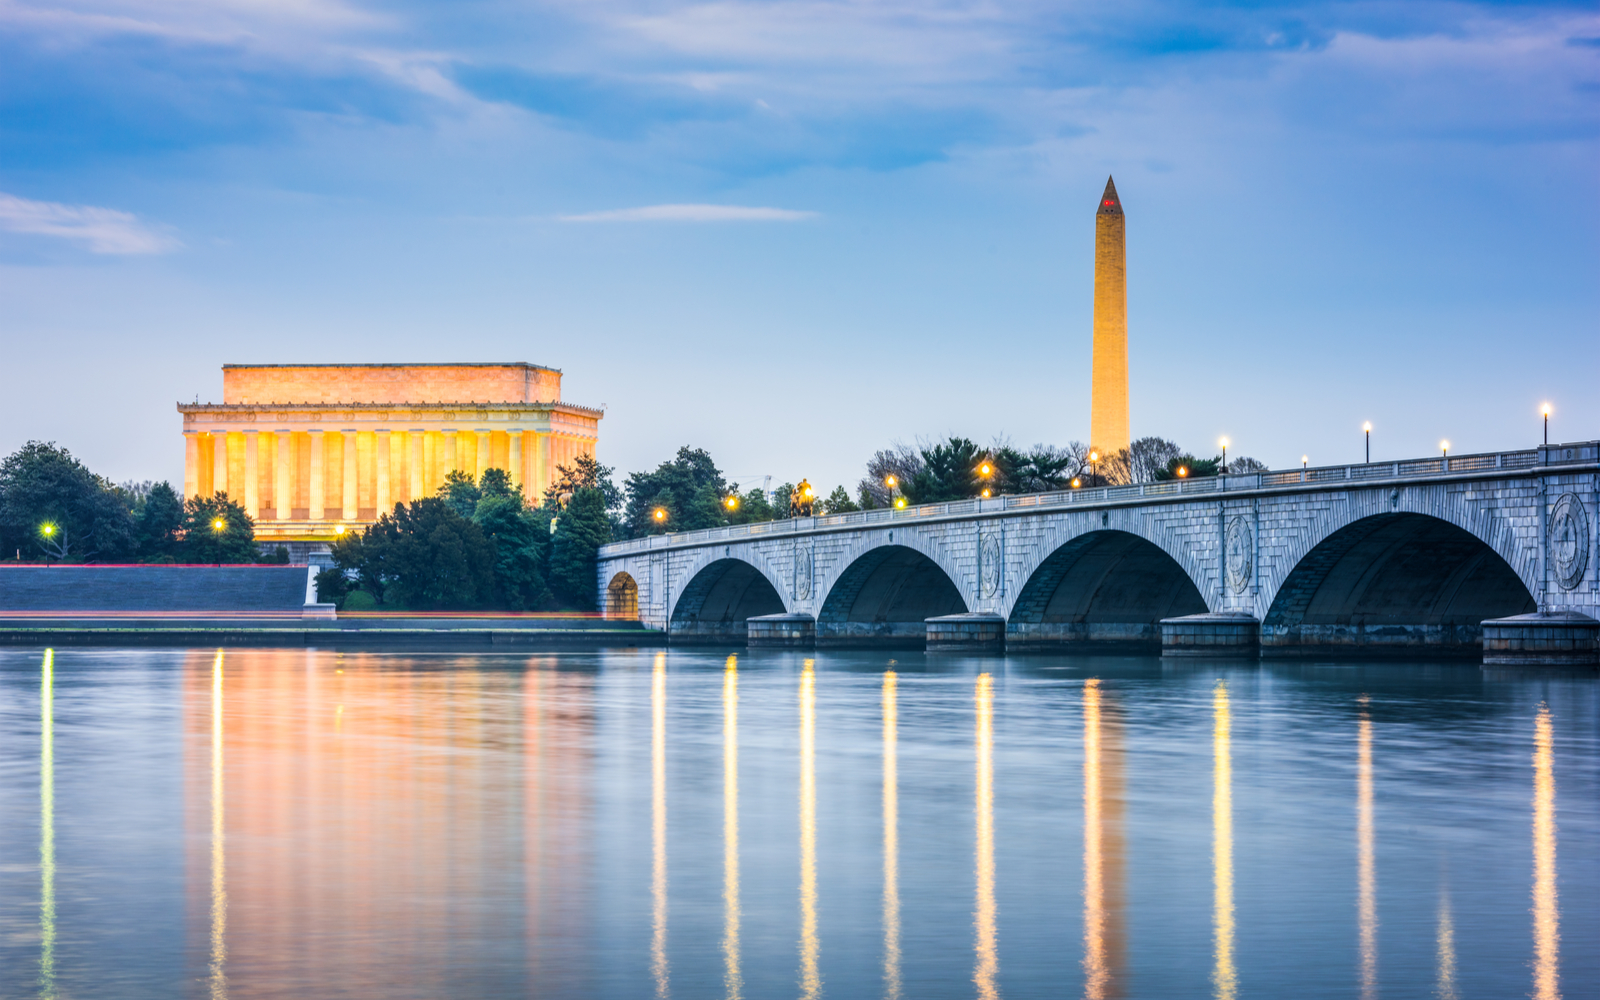 Where to Stay in Washington, D.C. | Best Areas & Hotels